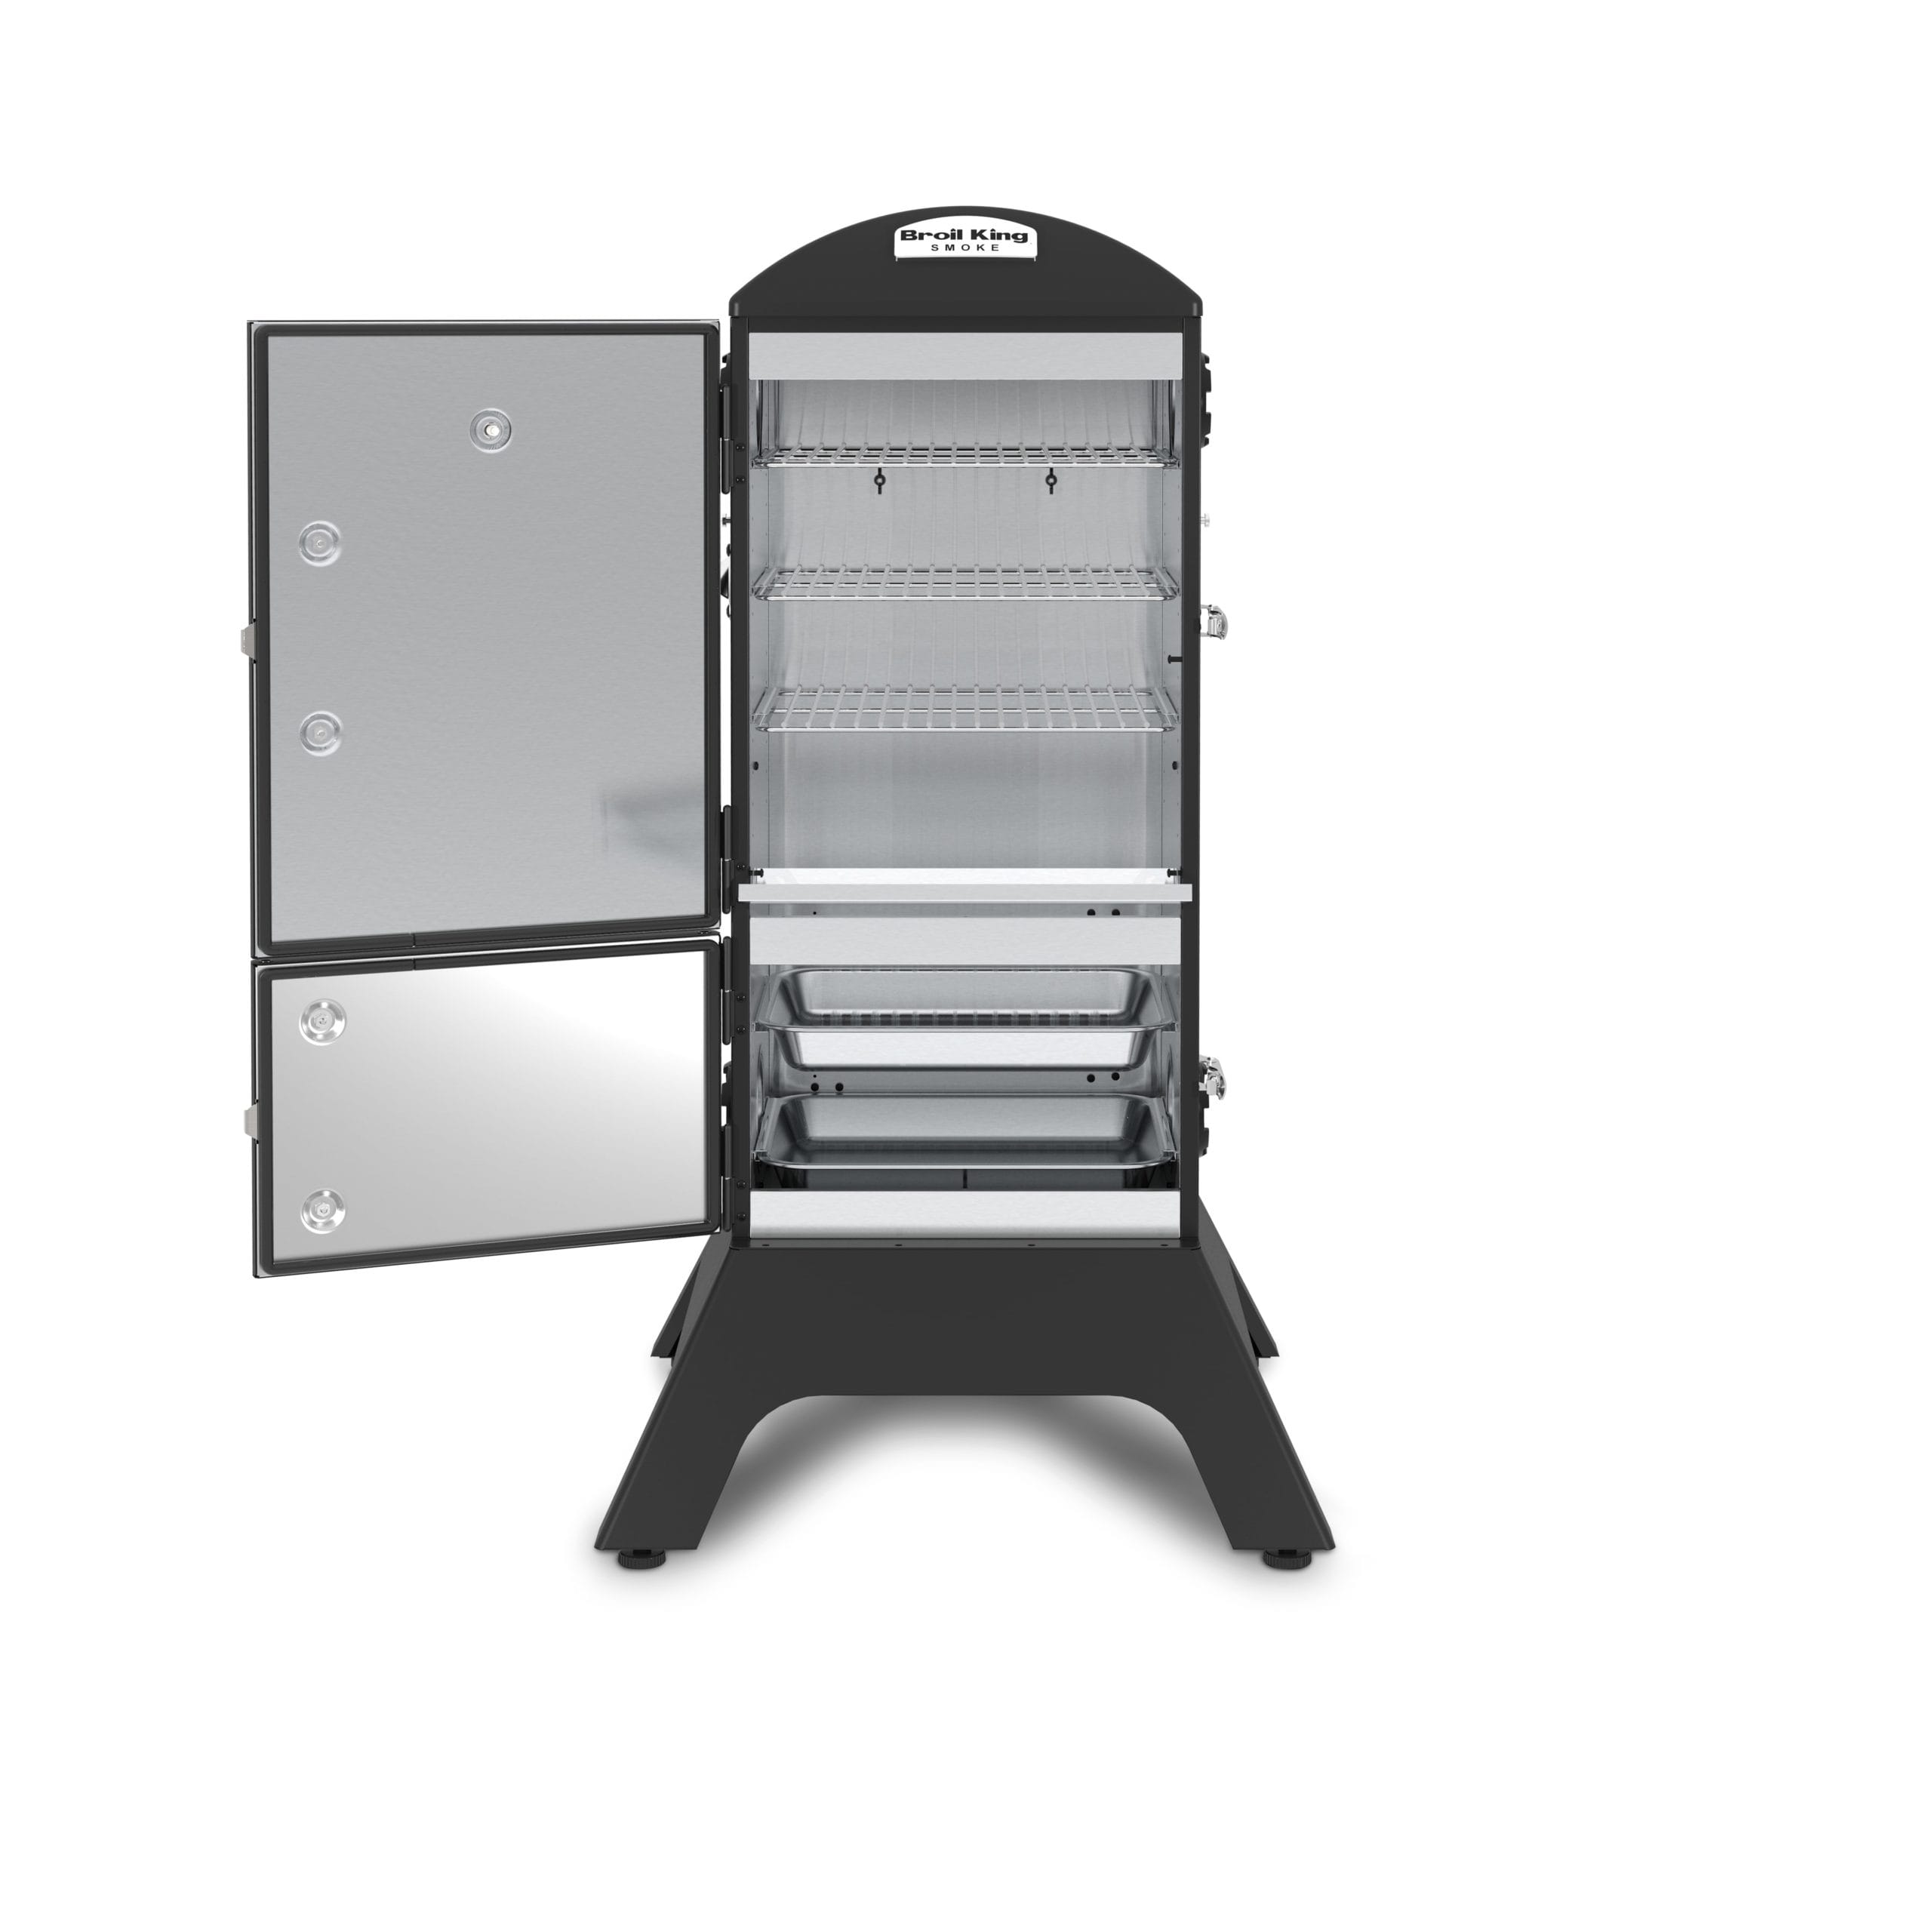 Vertical Cabinet Charcoal Smoker by Broil King